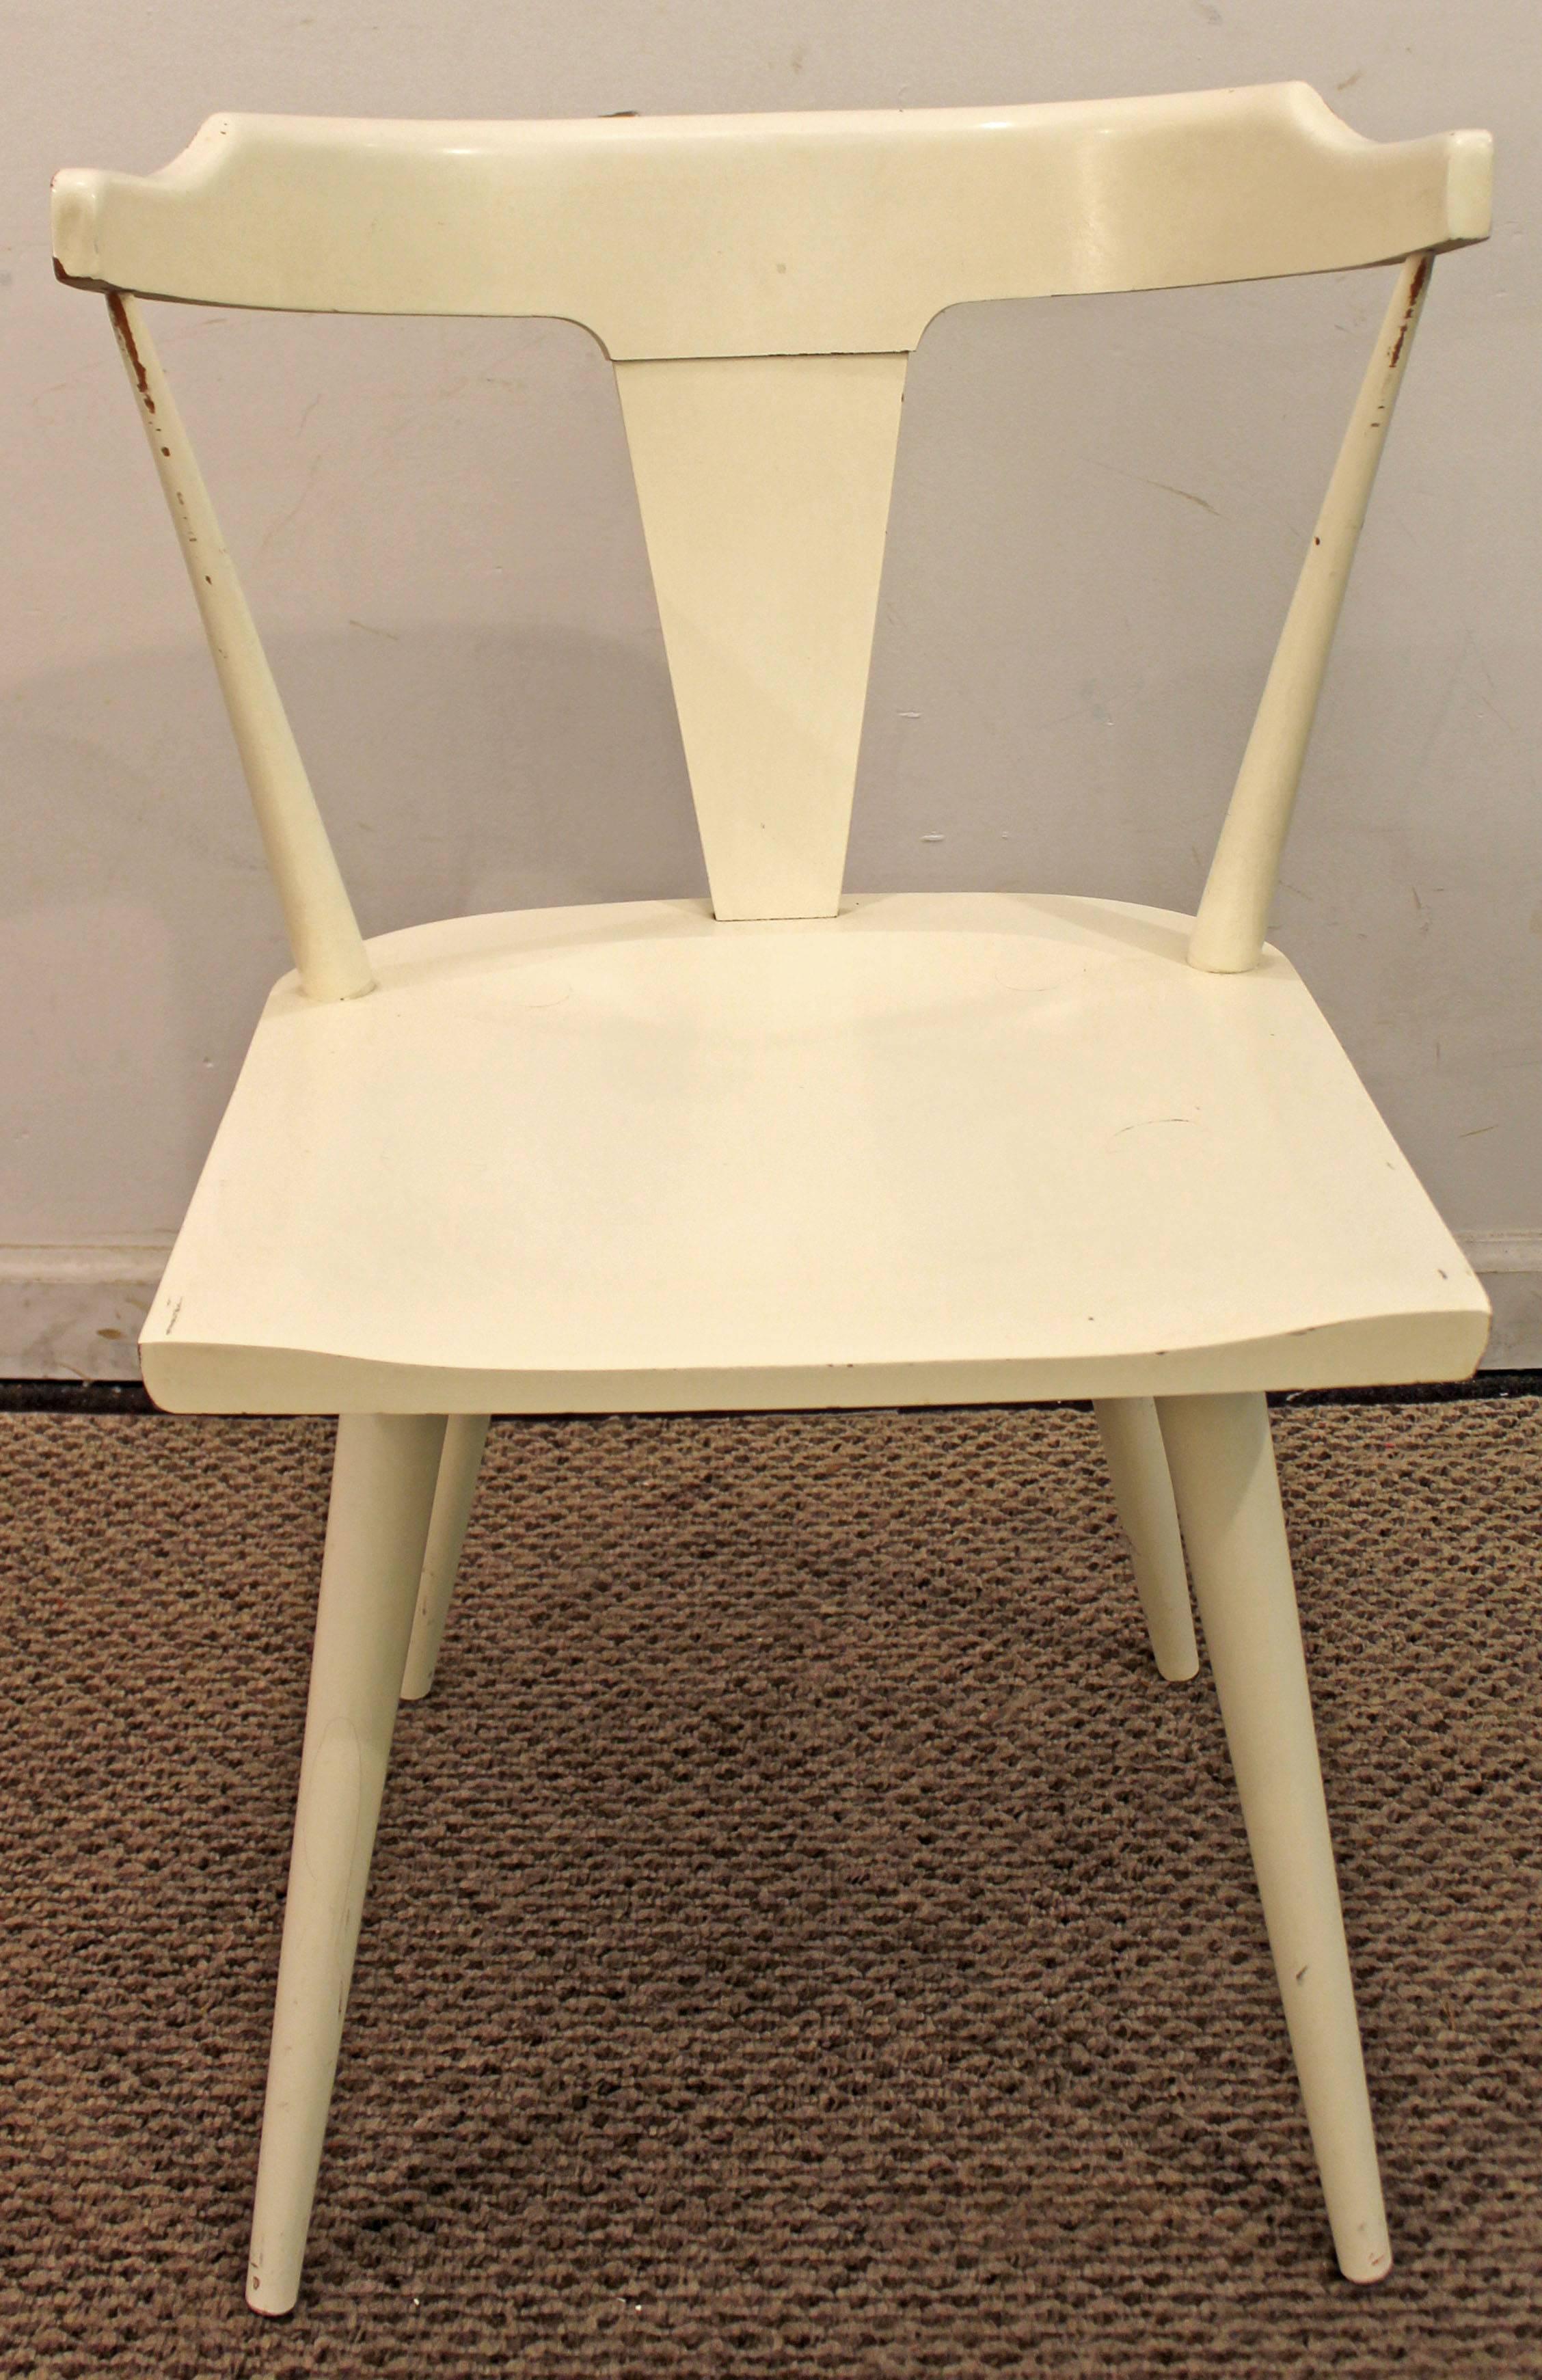 Offered is a chair designed by Paul McCobb for Planner Group by Winchendon. It has been painted white by the previous owner. See our other listings for a matching headboard, credenza, and dresser!

Measures: Seat height 17.25